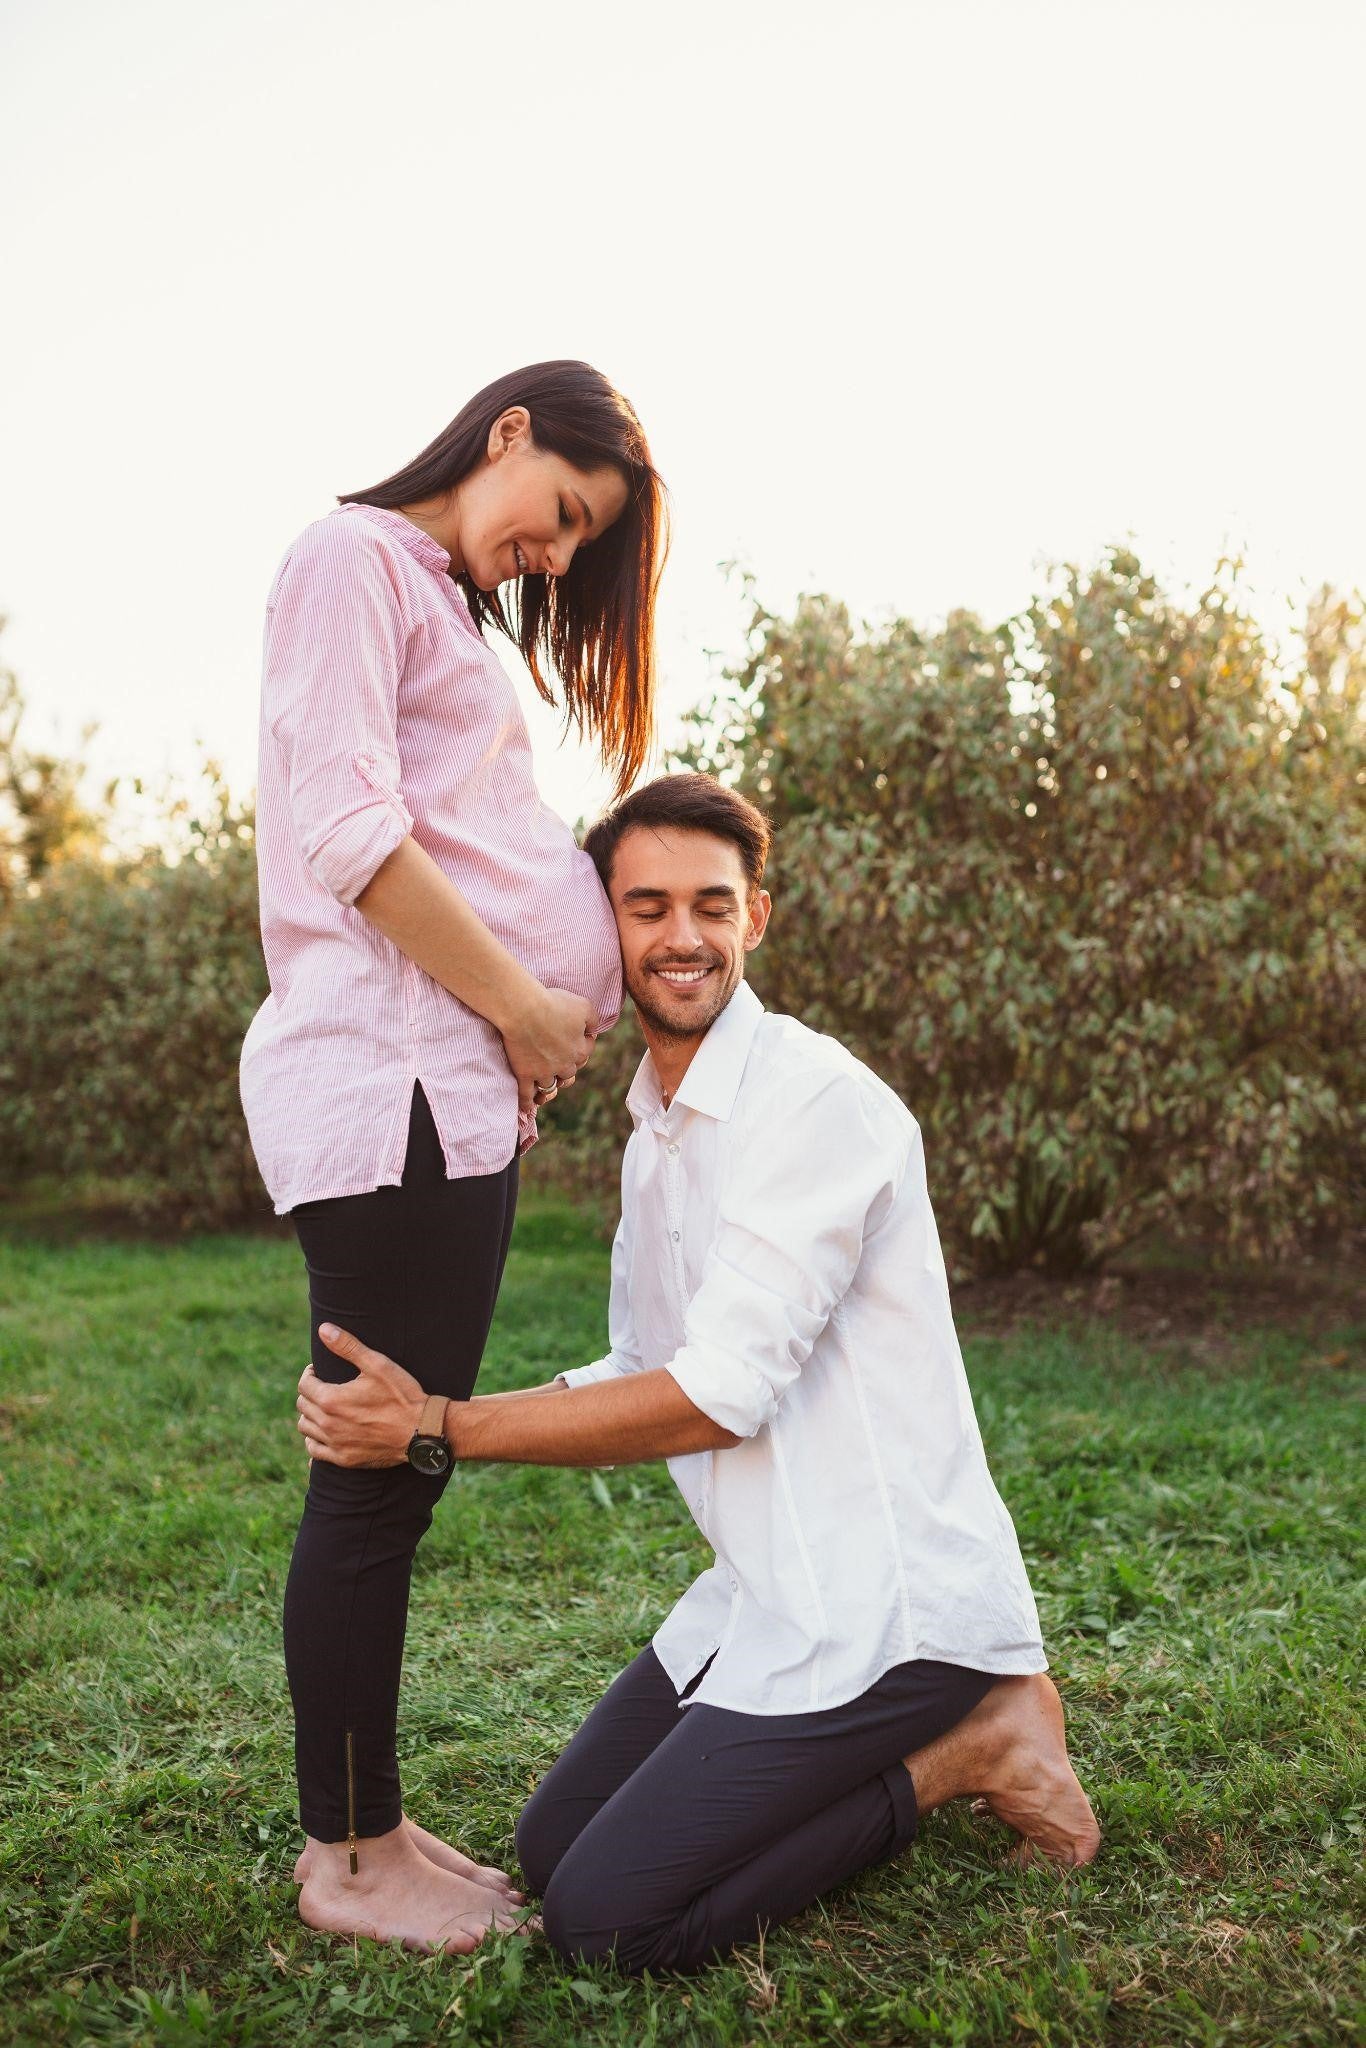 Maternity Photoshoot Poses for Couples